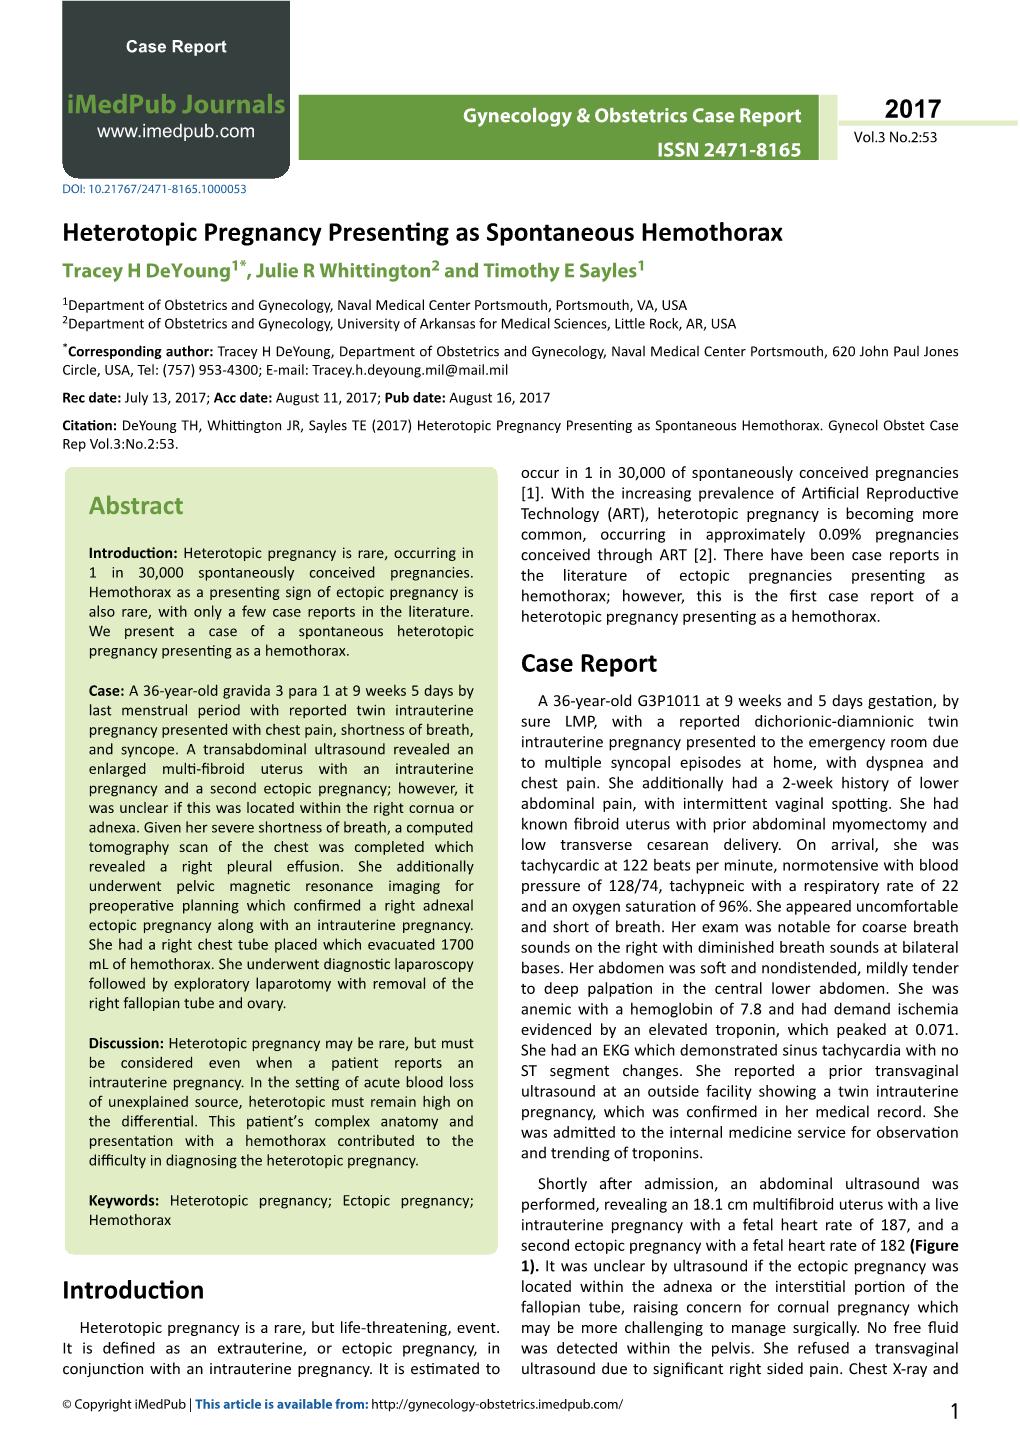 Heterotopic Pregnancy Presenting As Spontaneous Hemothorax Tracey H Deyoung1*, Julie R Whittington2 and Timothy E Sayles1